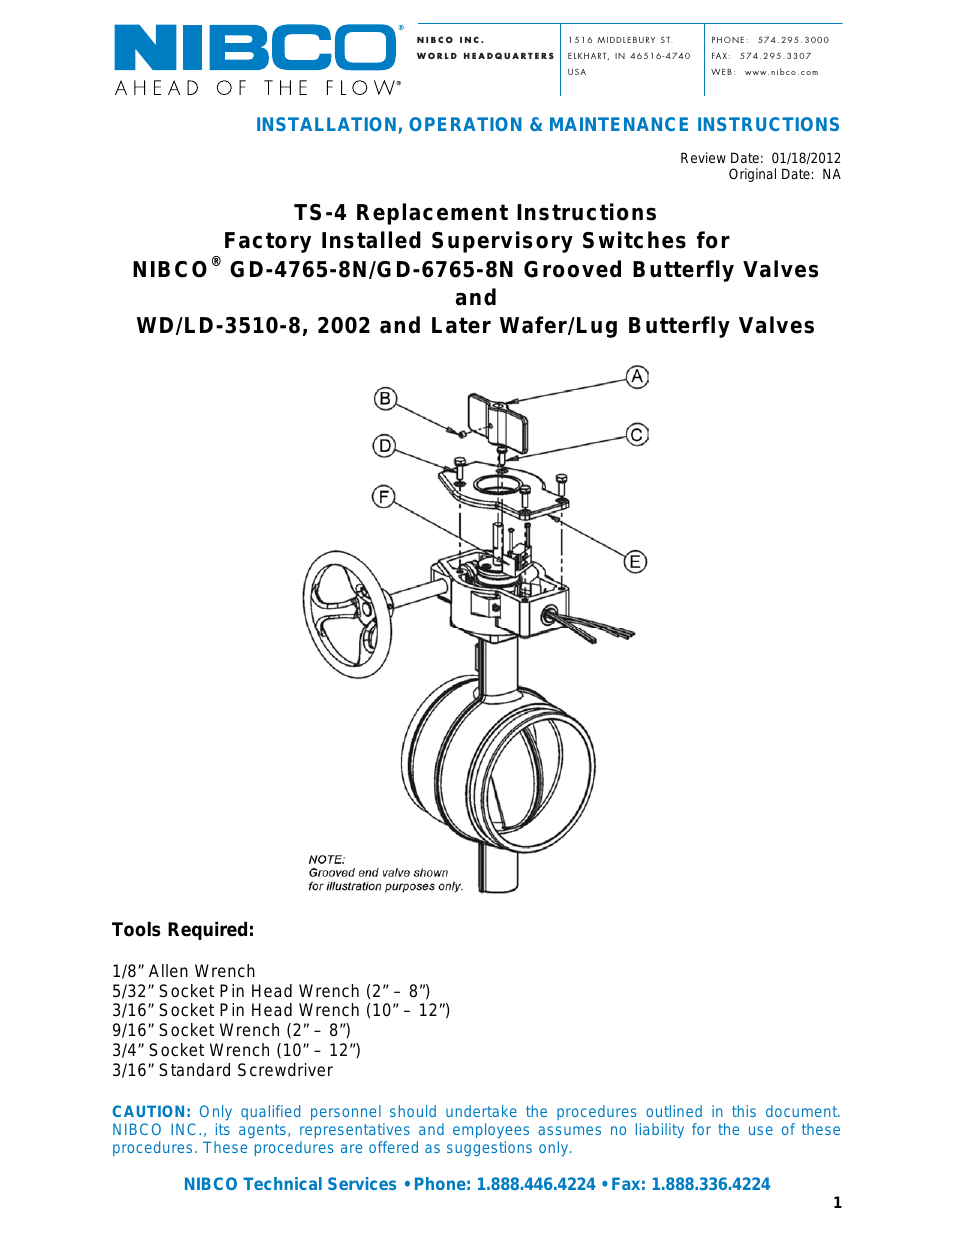 TS-4 Replacement Supervisory Switches For Butterfly Valves